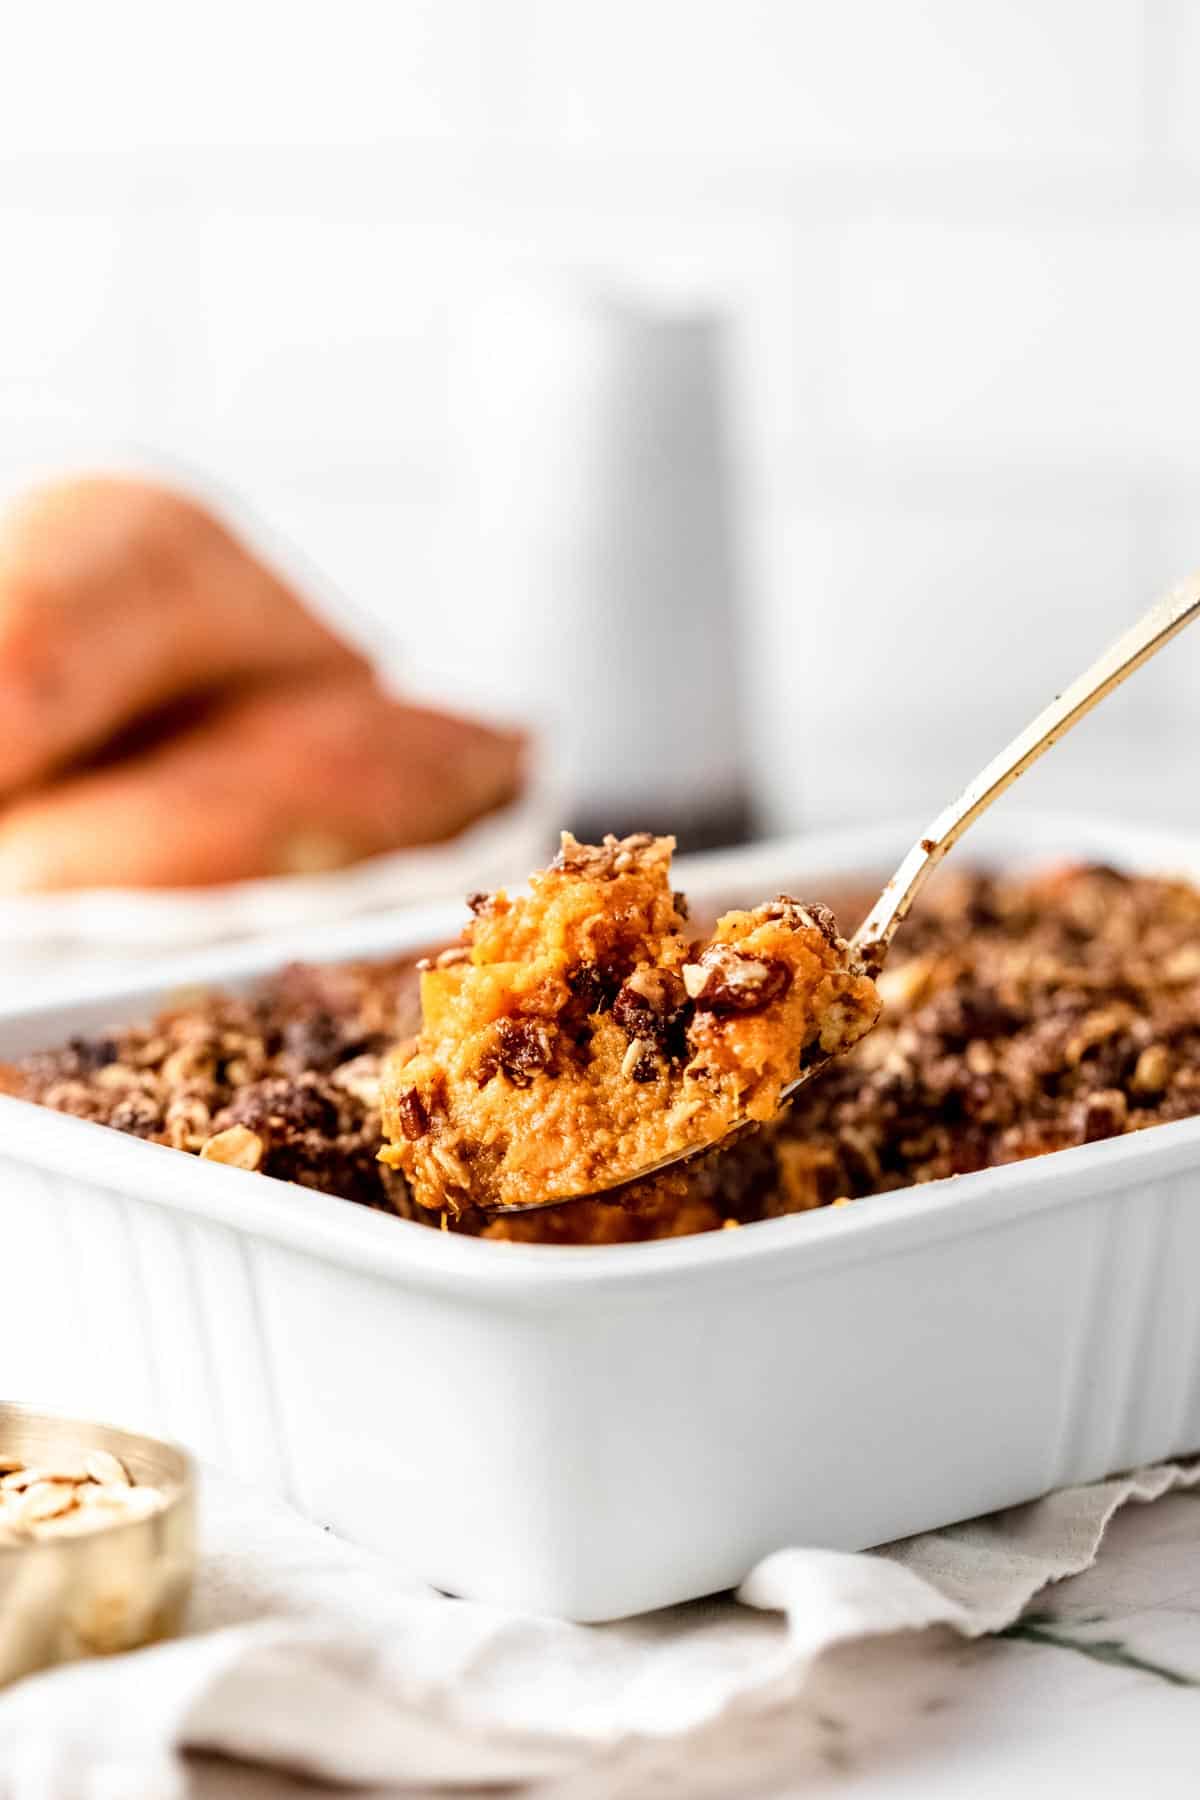 A spoon lifts a serving of sweet potato casserole from a white baking dish.